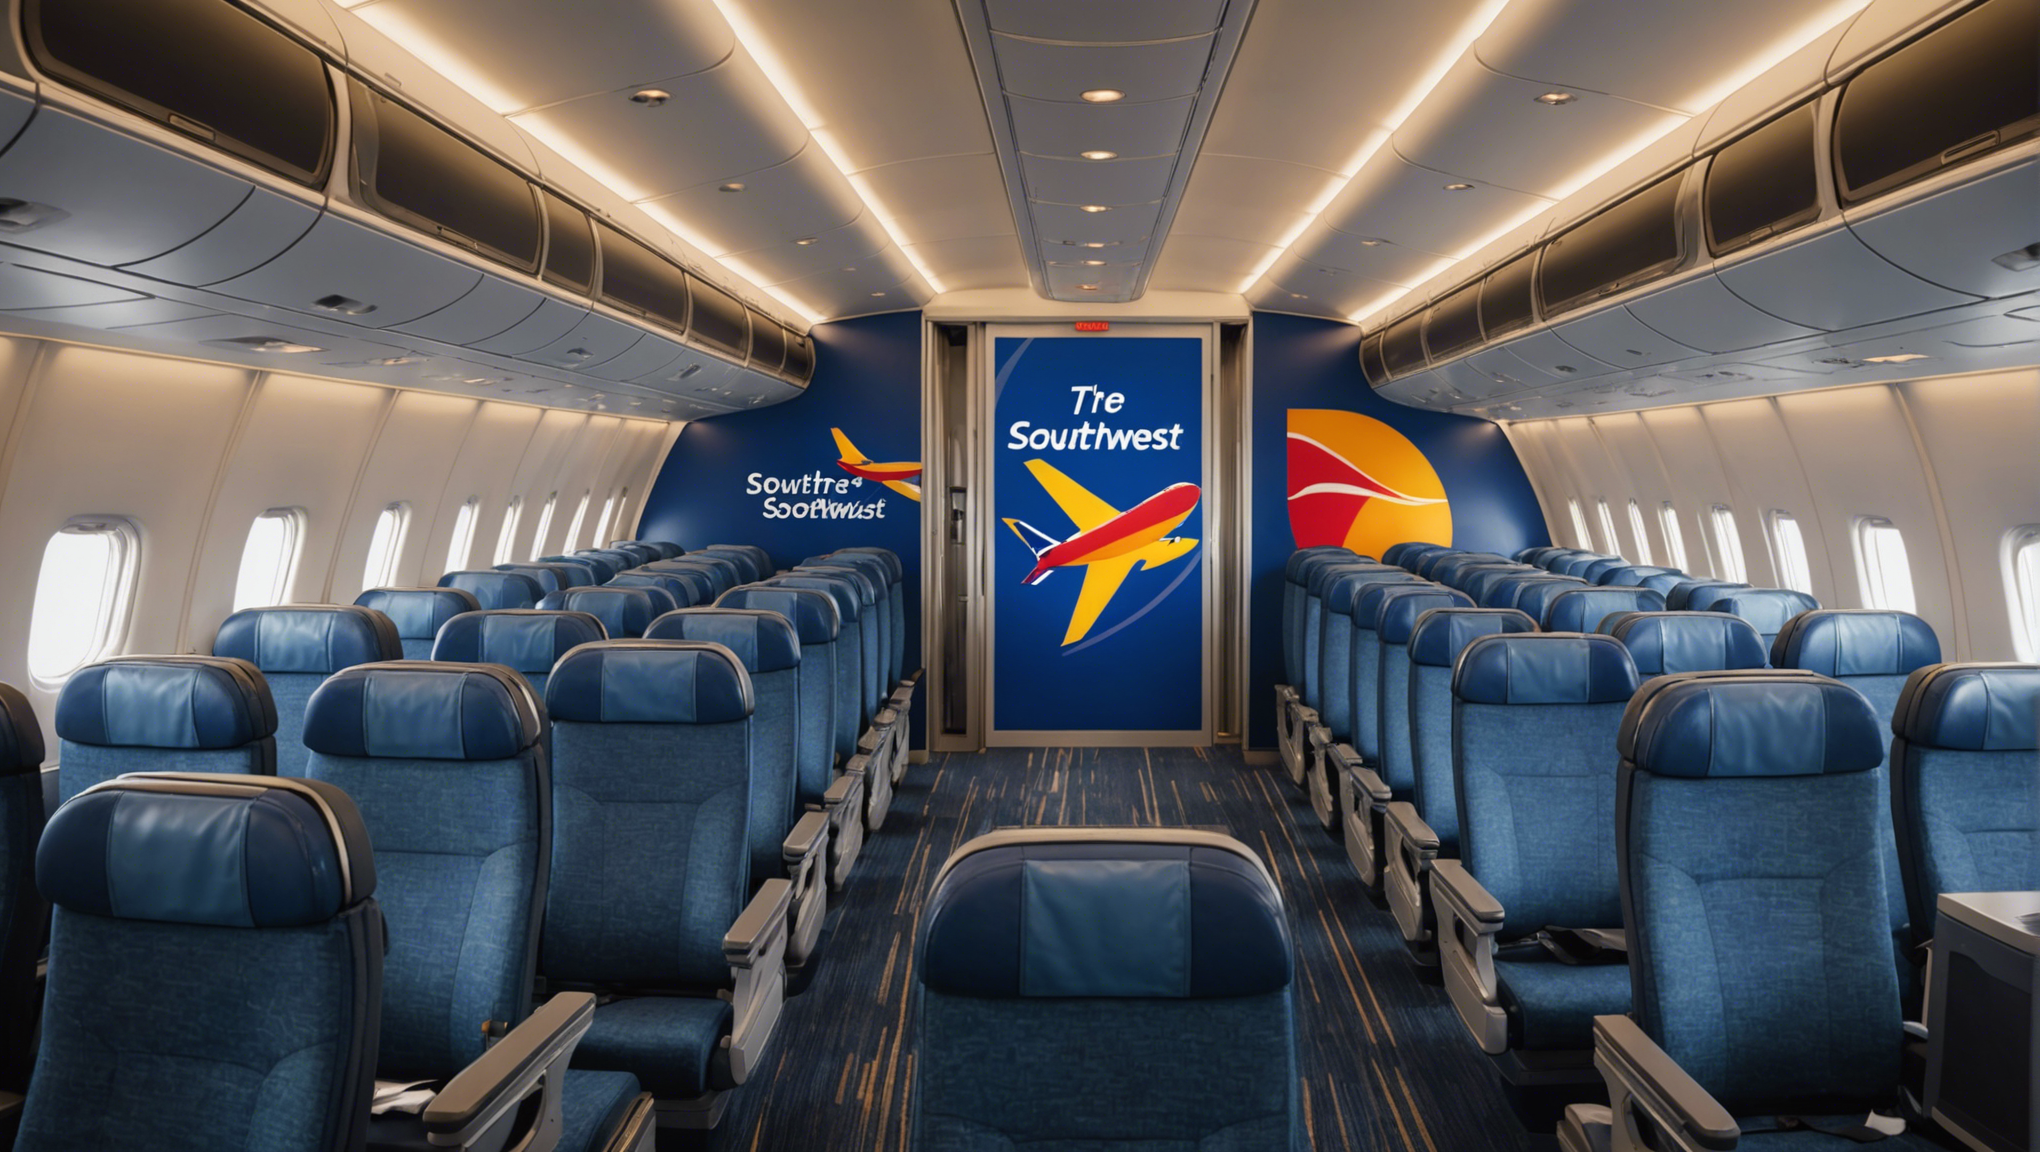 discover southwest airlines' future cabin and fare transformation for an enhanced travel experience and innovative fare offers.